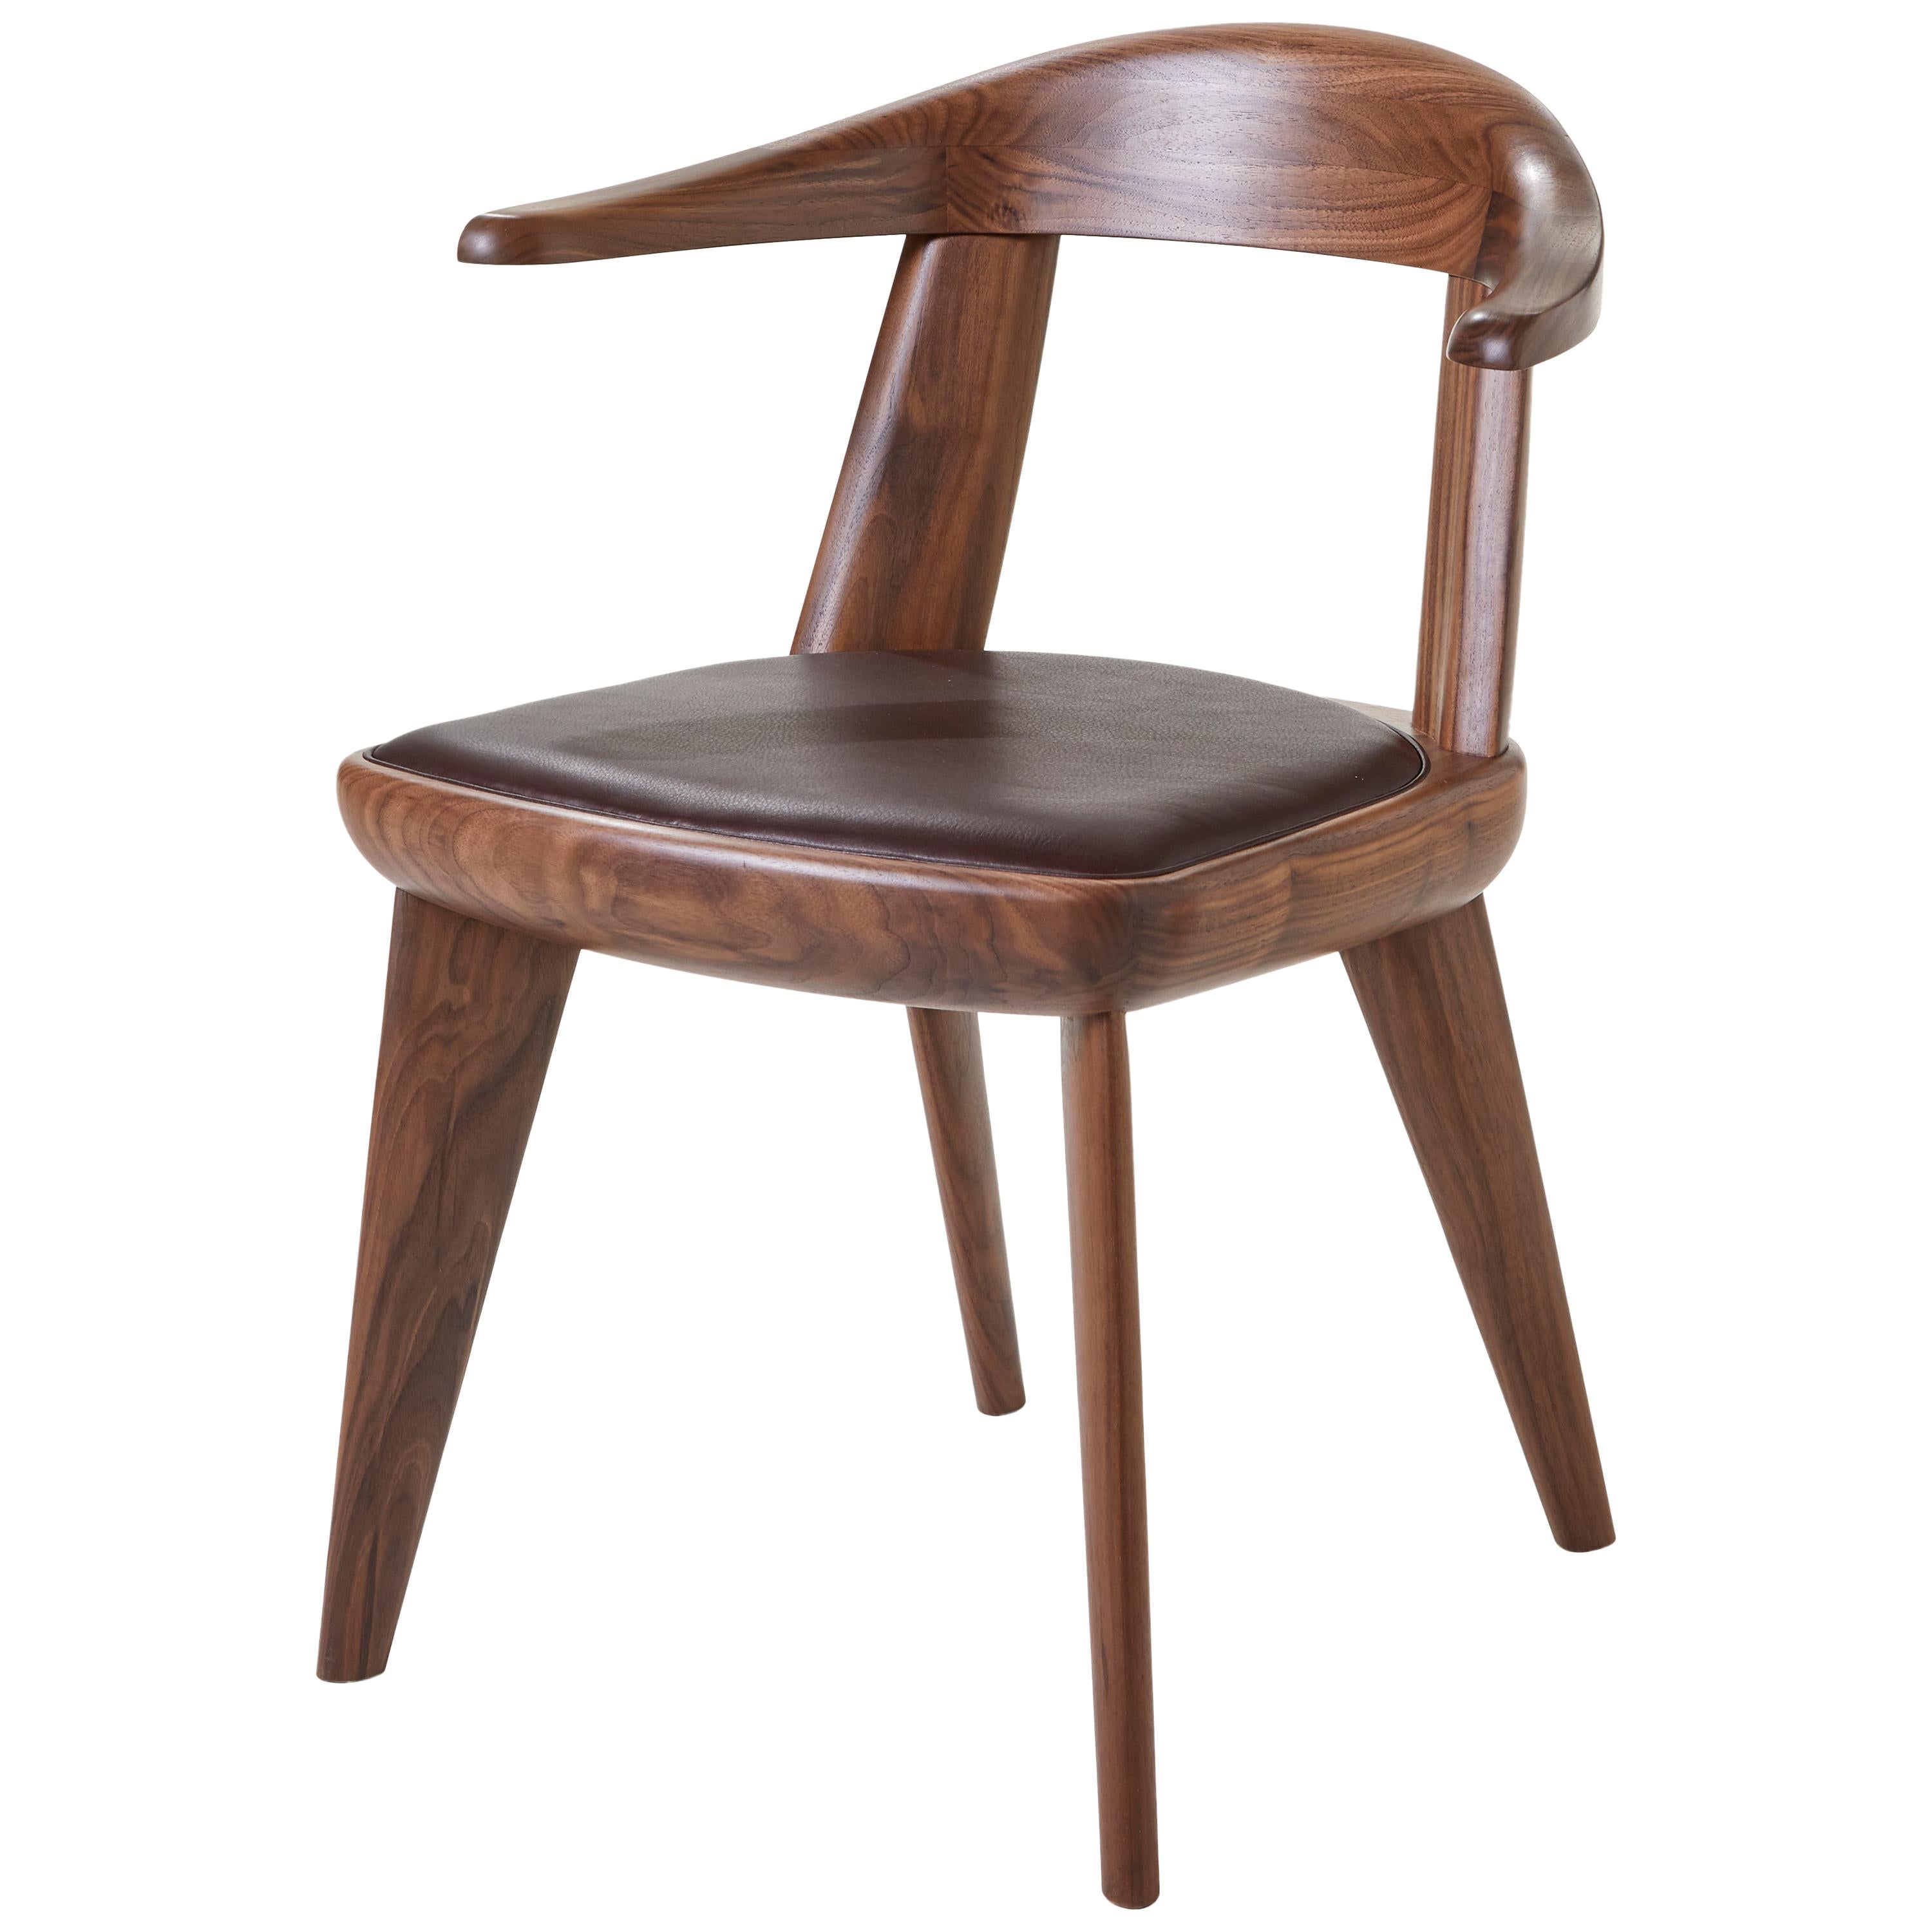 Brutus Armchair in Solid Walnut with Leather Seat Designed by Craig Bassam